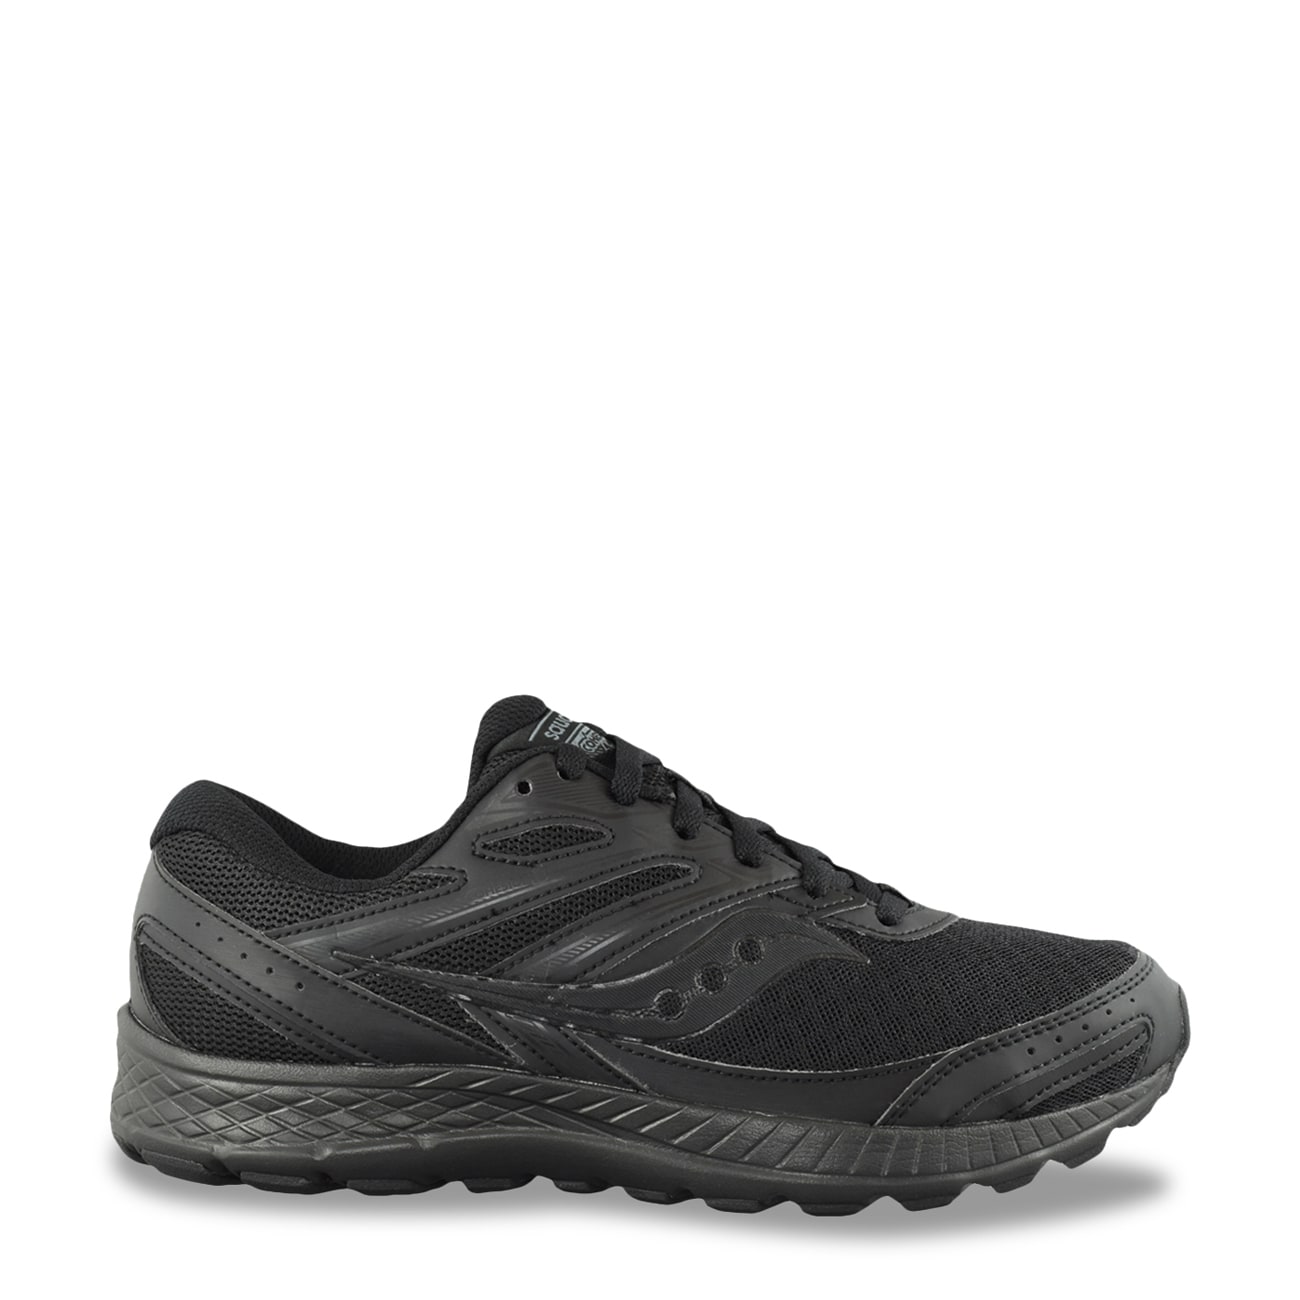 saucony shoes for sale canada